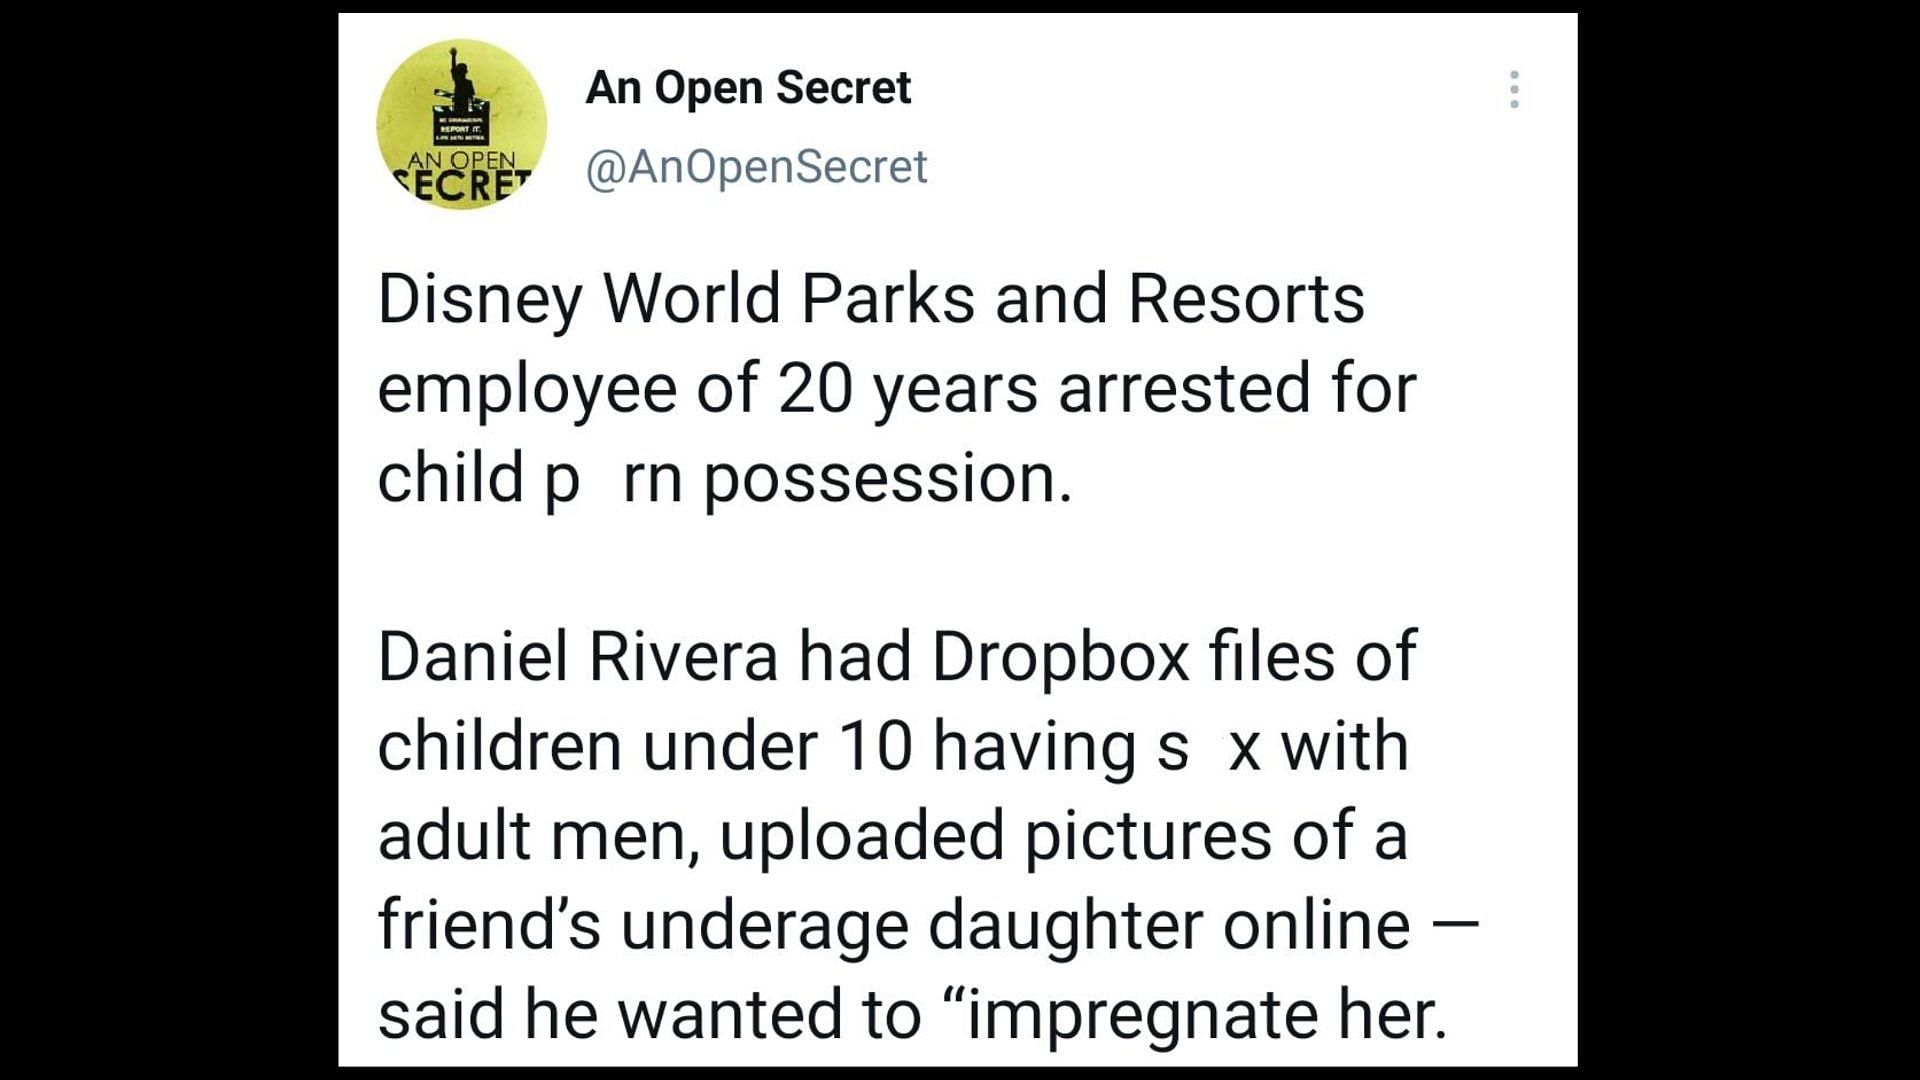 Rivera has been arrested in connection to sharing child p*rn. (Image via An Open Secret/Twitter)